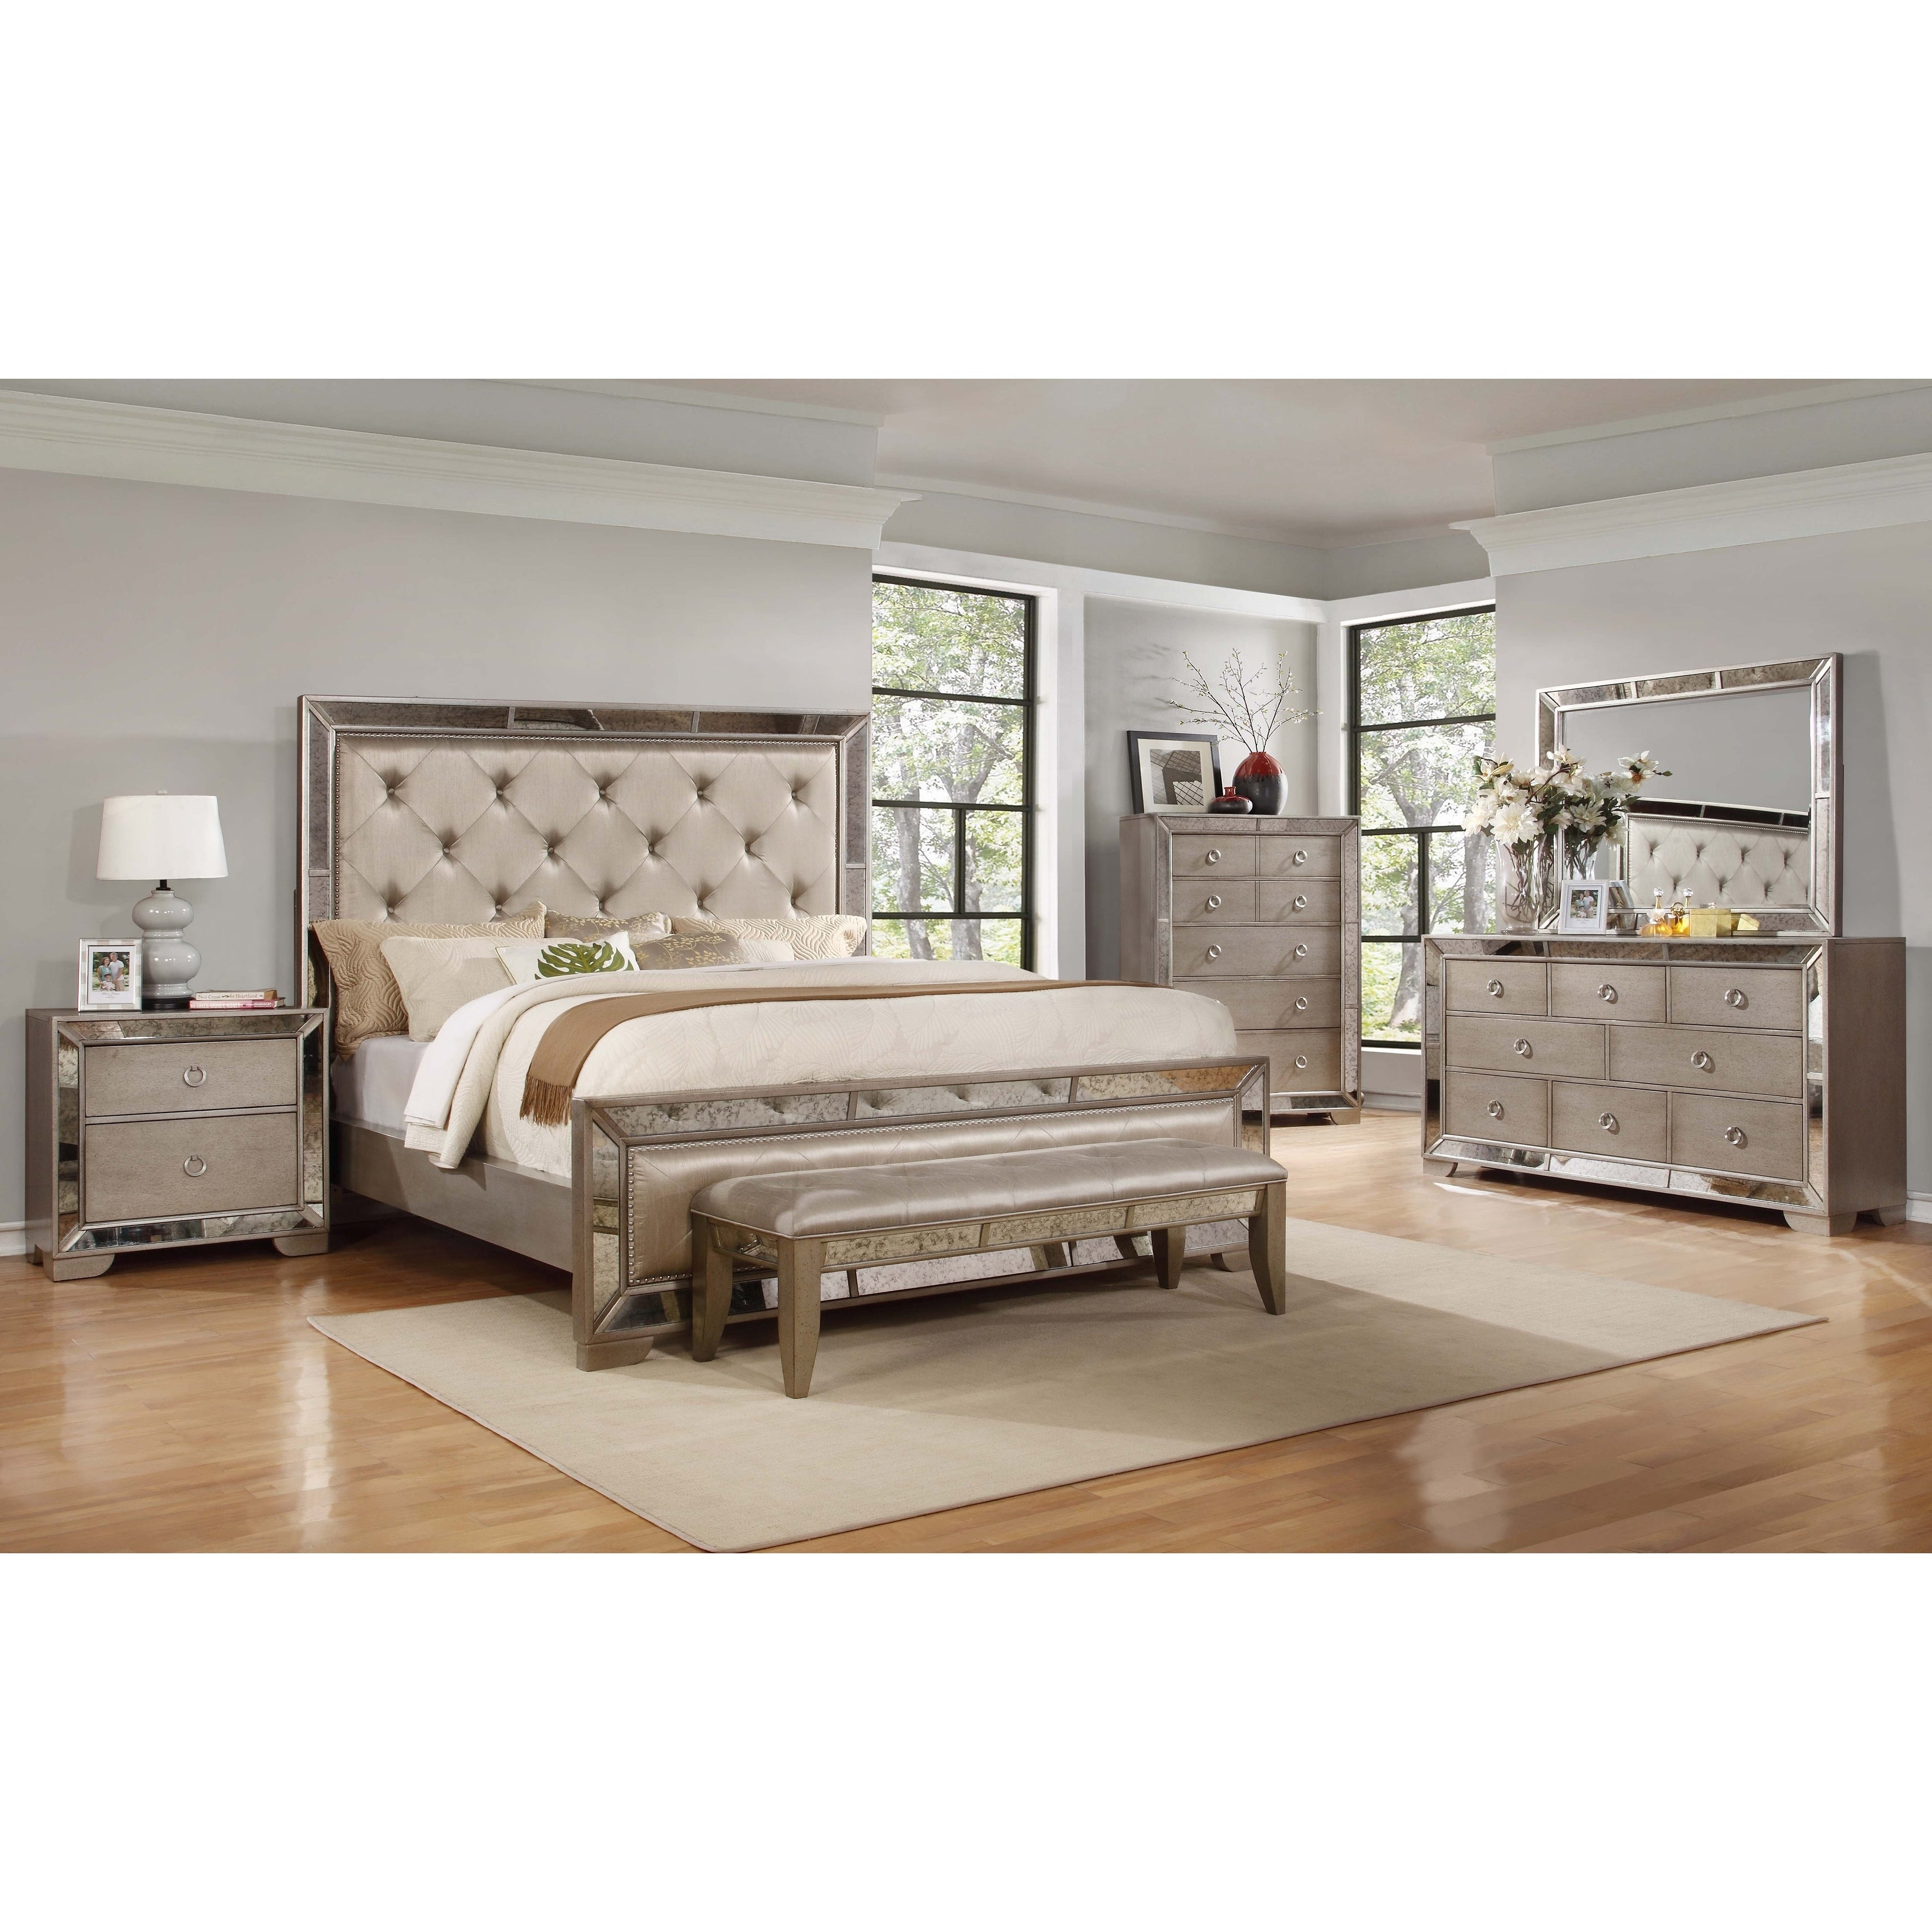 Best Master Furniture Ava 5 Piece Bedroom Set within proportions 3423 X 3423